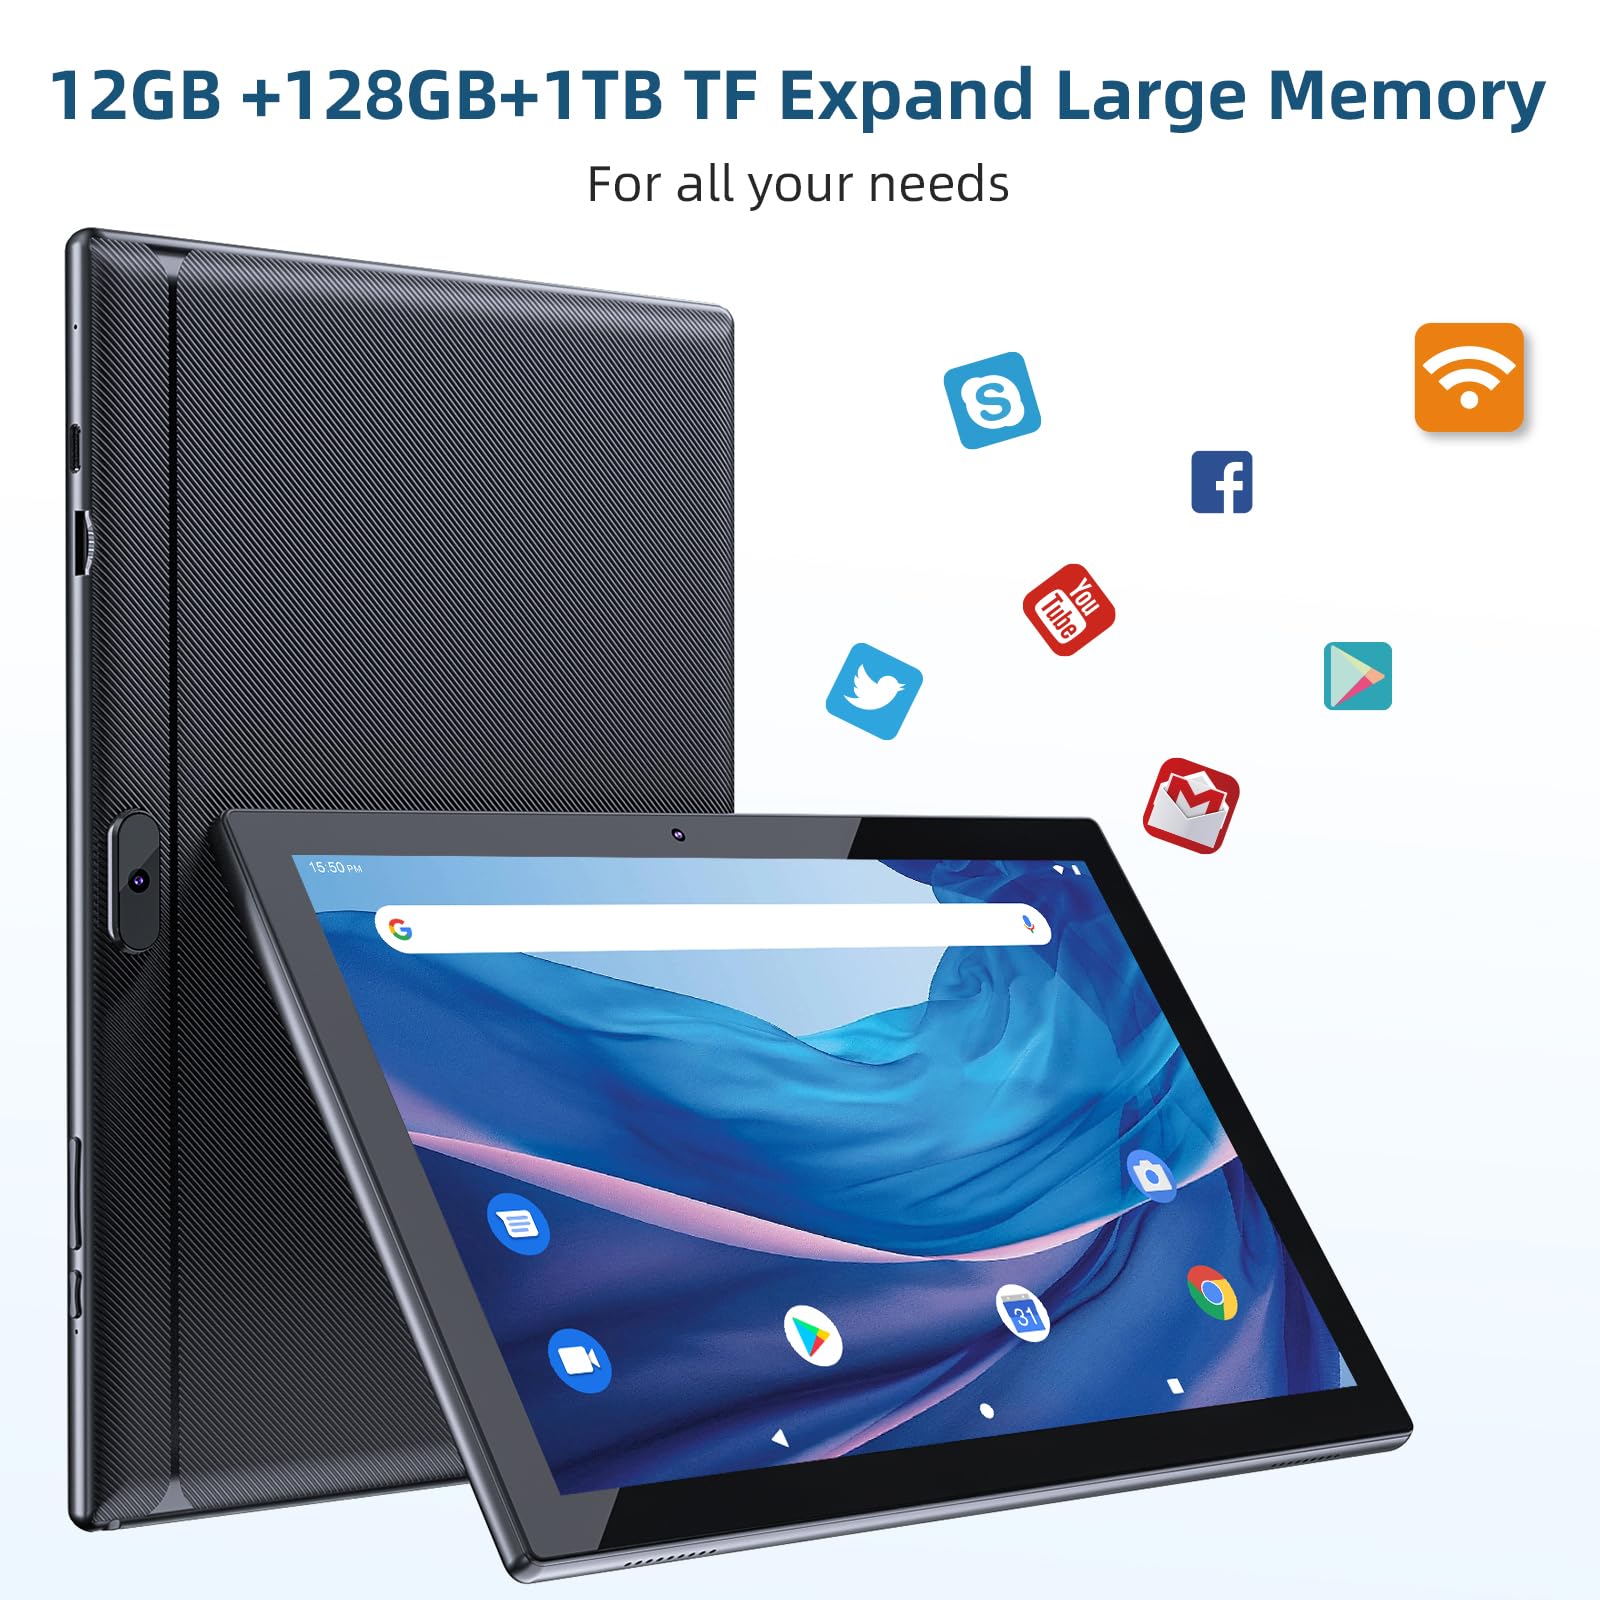 HOTTABLET 2023 New Tablet 10 inch, Android 13 Tablets, 12GB RAM 128GB ROM Computer Tablet with Keyboard, IPS Screen, 2.4G/5G WiFi 6, Bluetooth 5.0 Tablet PC, 1TB Expand Tablet with Stylus, Black